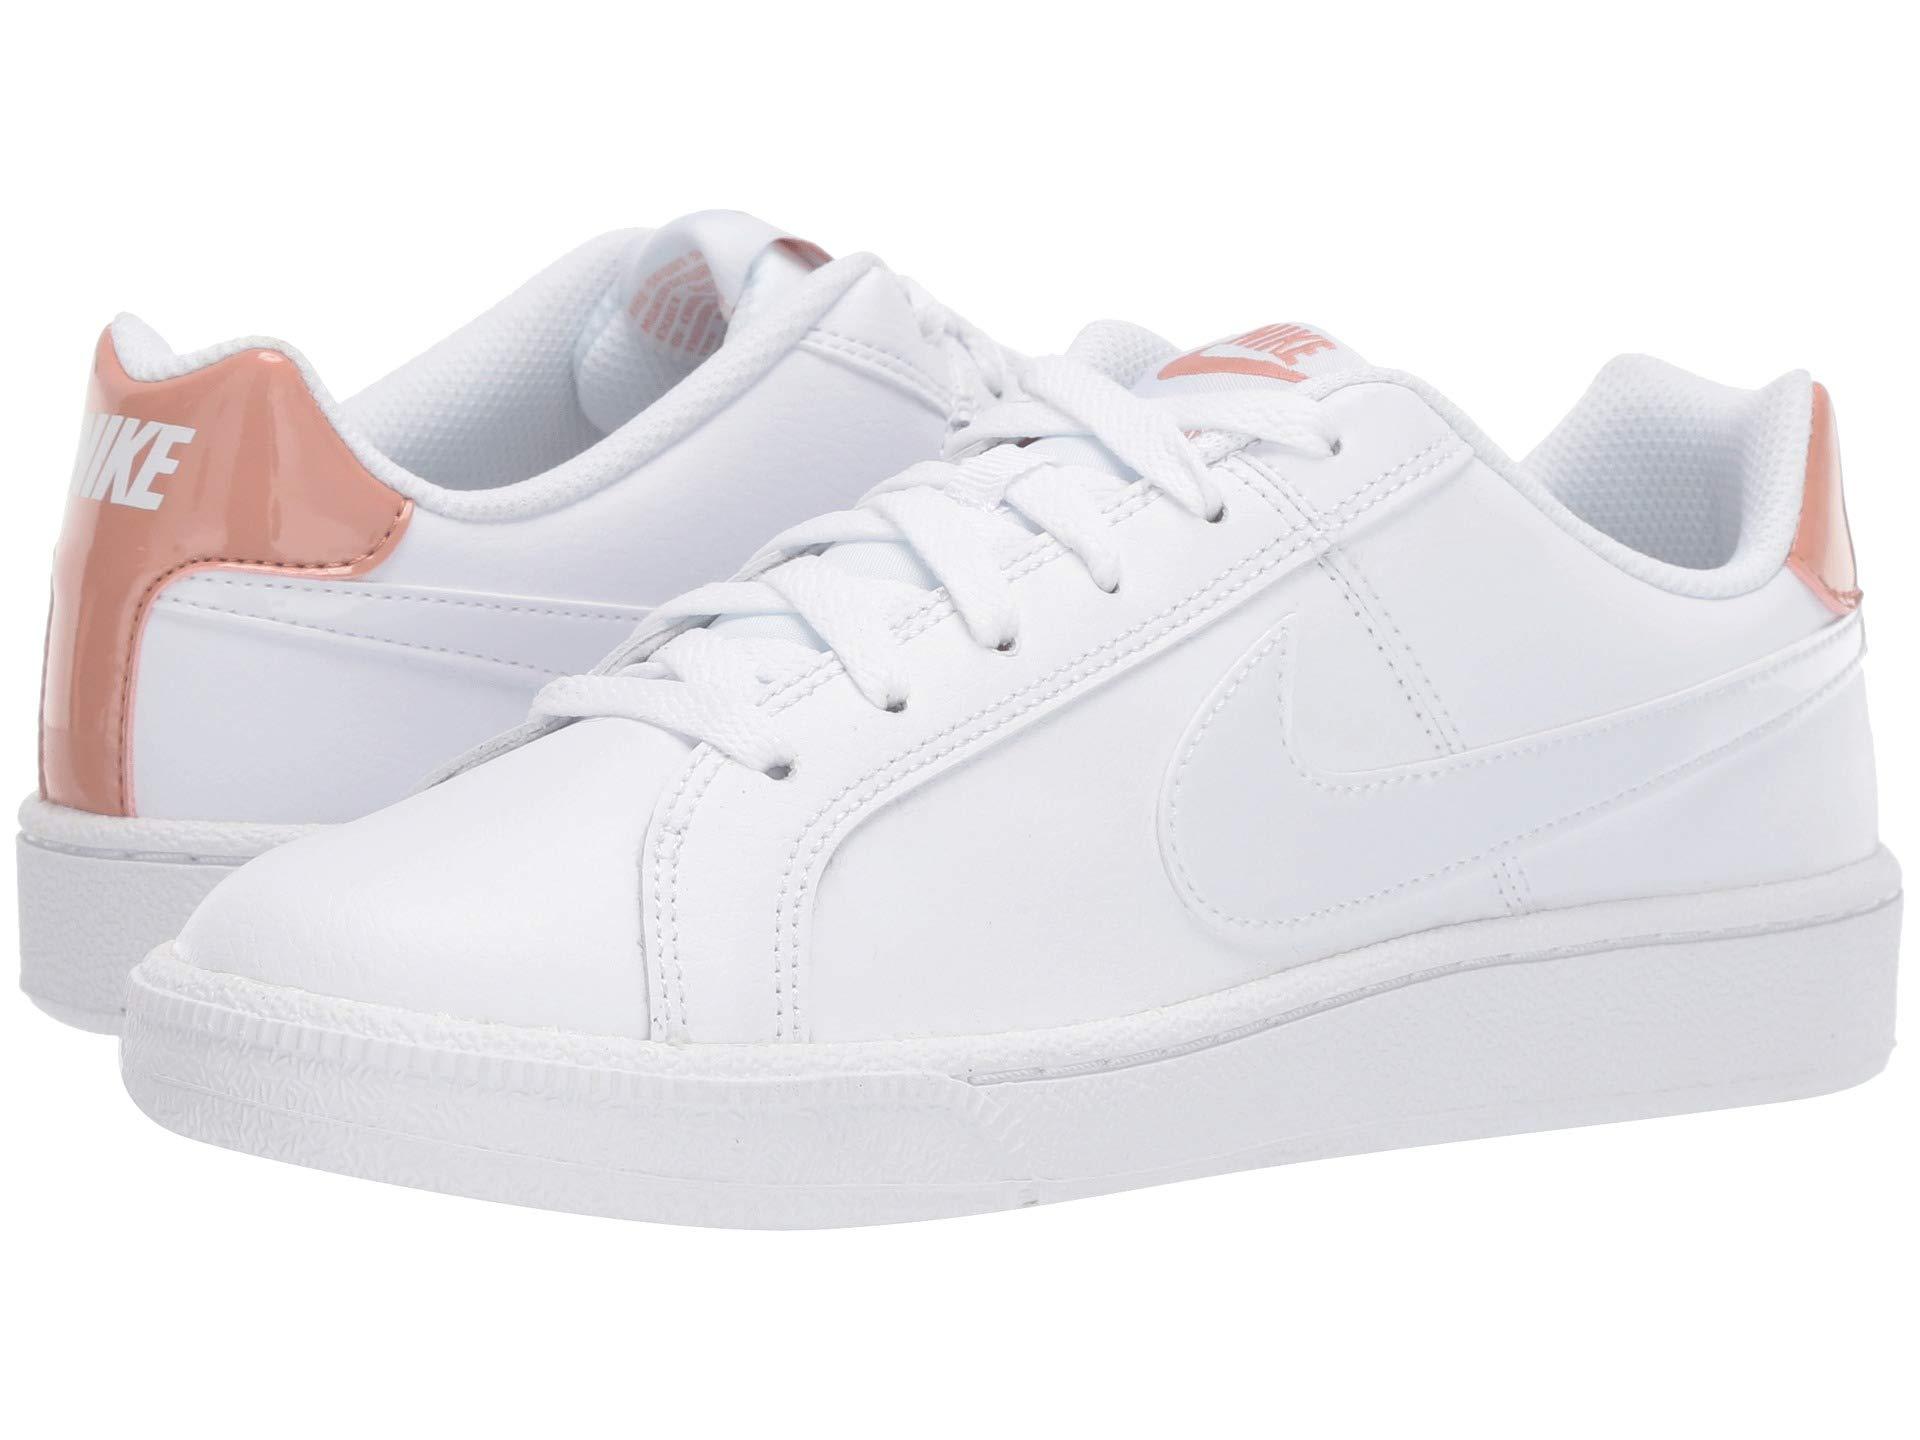 white court royale sneakers